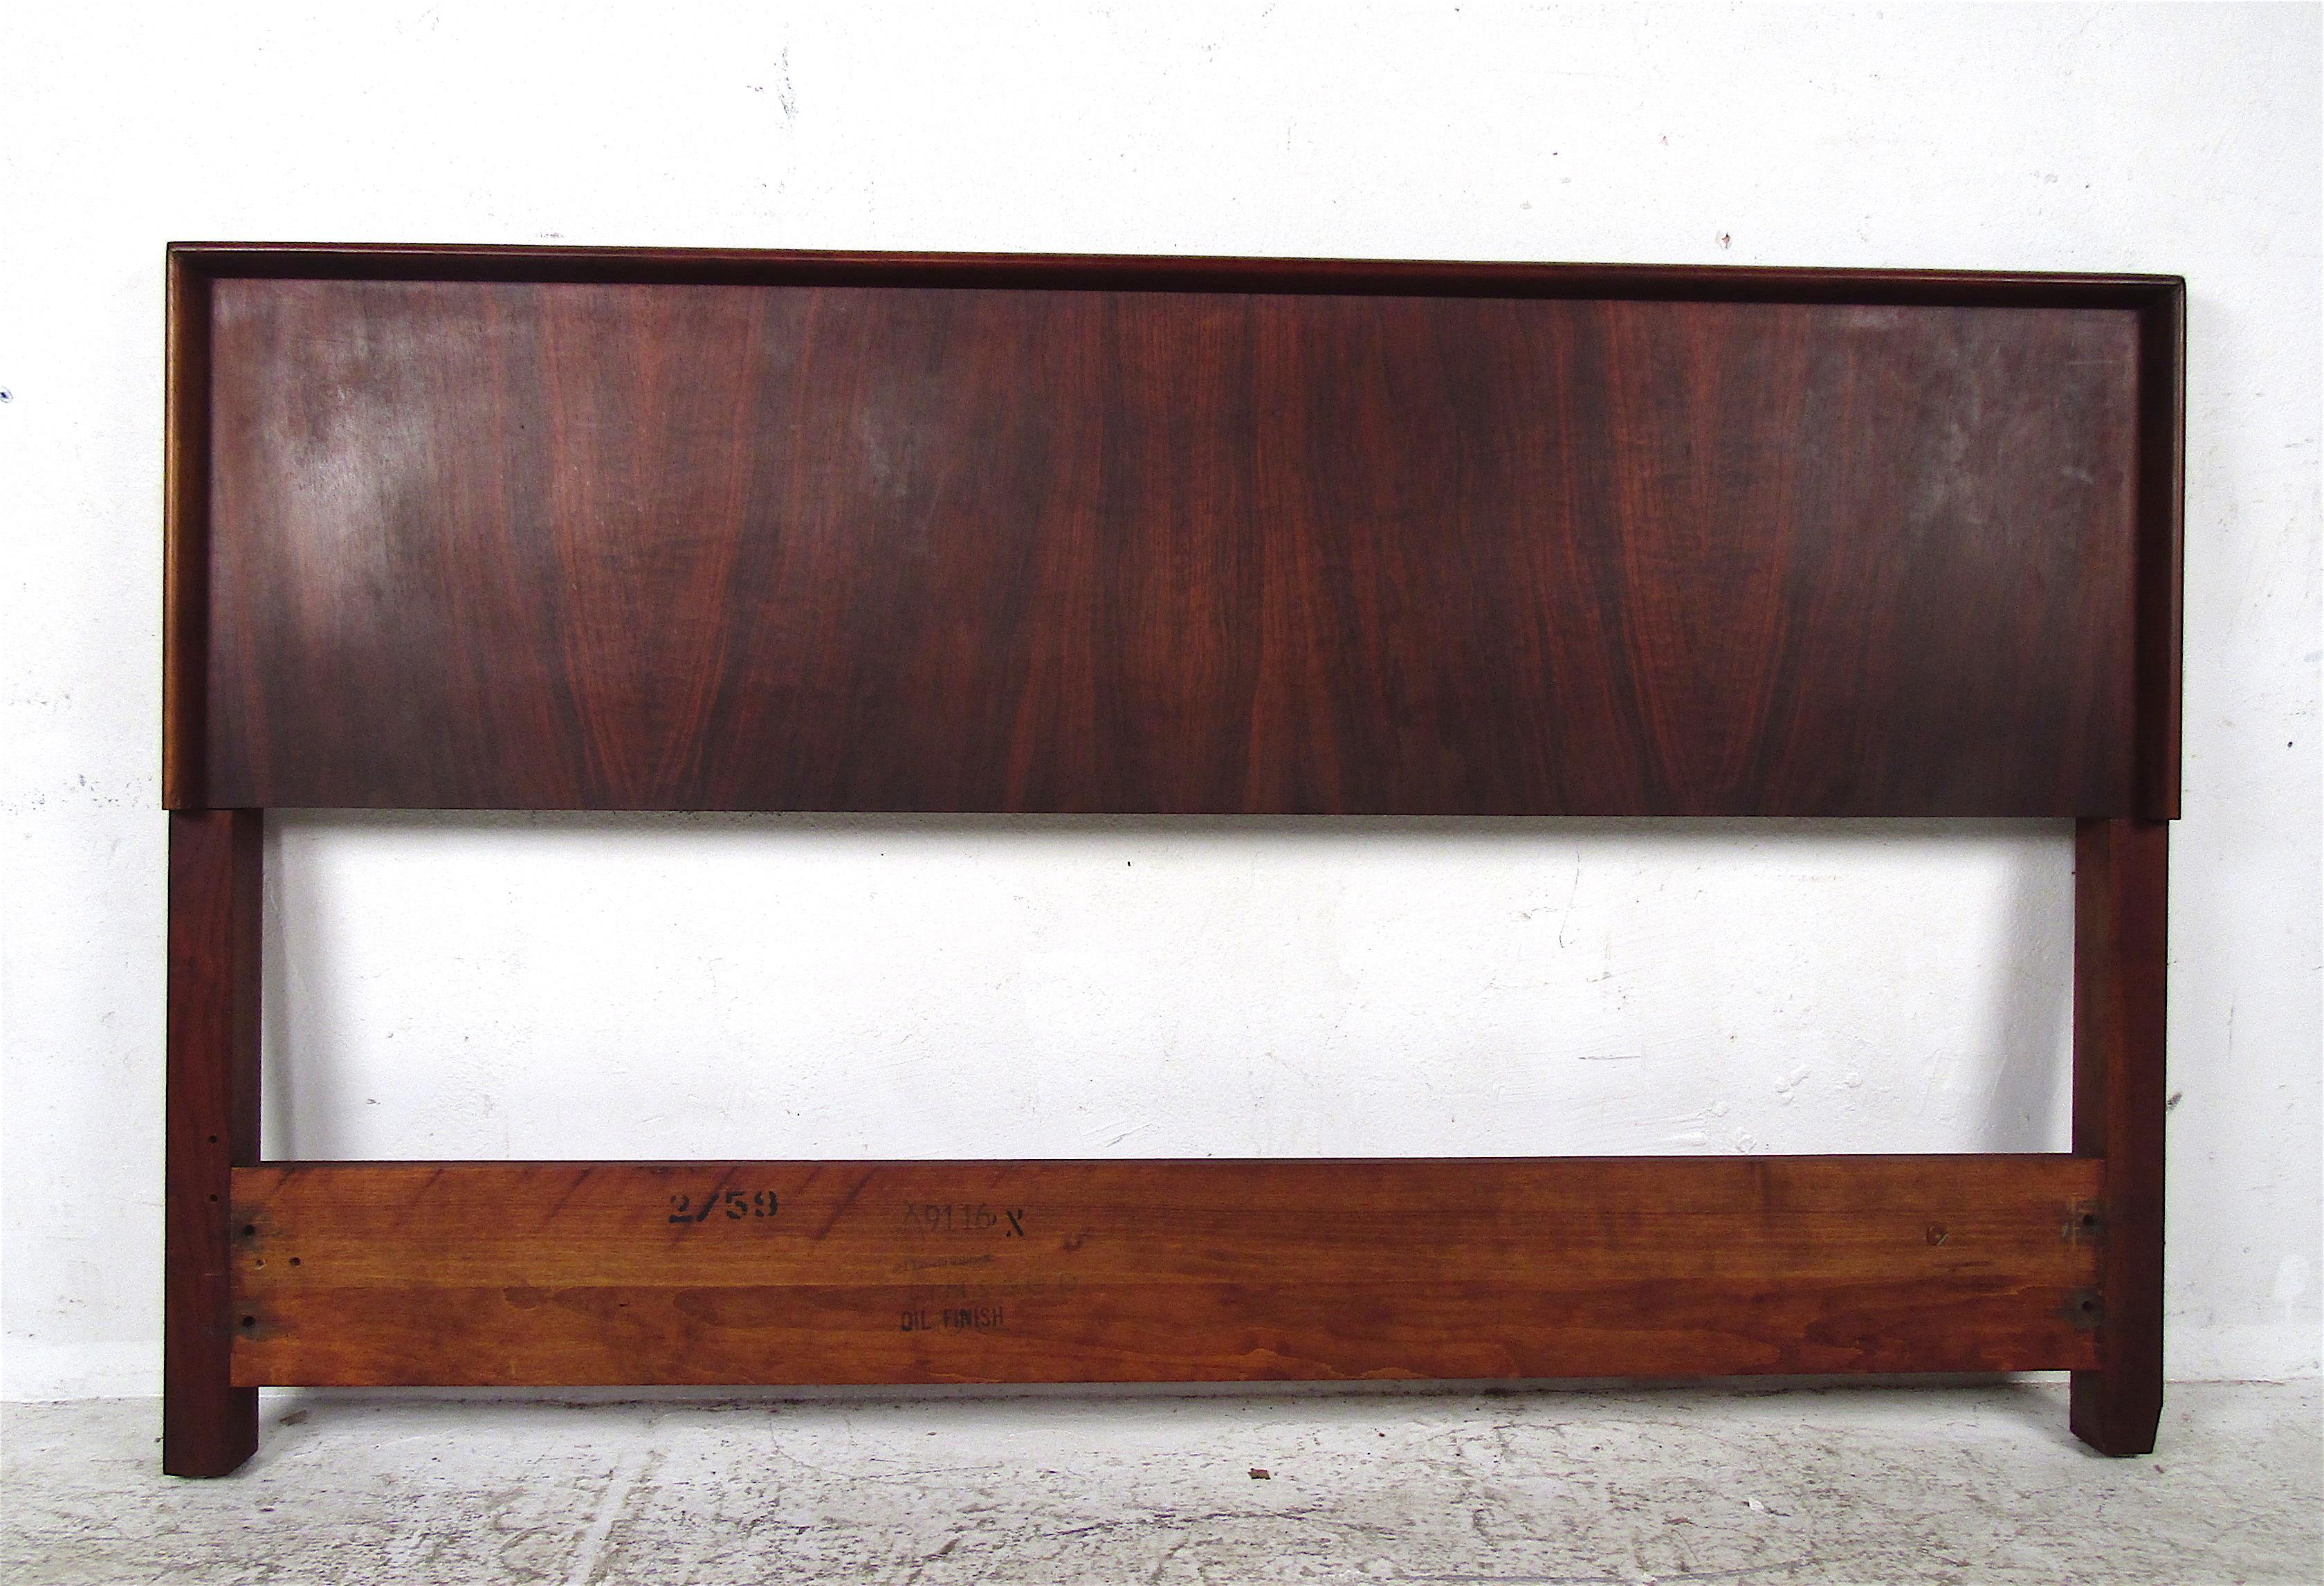 This beautiful vintage modern rosewood headboard features rich wood grain on the front with embossed edges. This versatile headboard is 56 inches wide so it can possibly be used as a twin, full, or double sized bed. Please confirm the item location